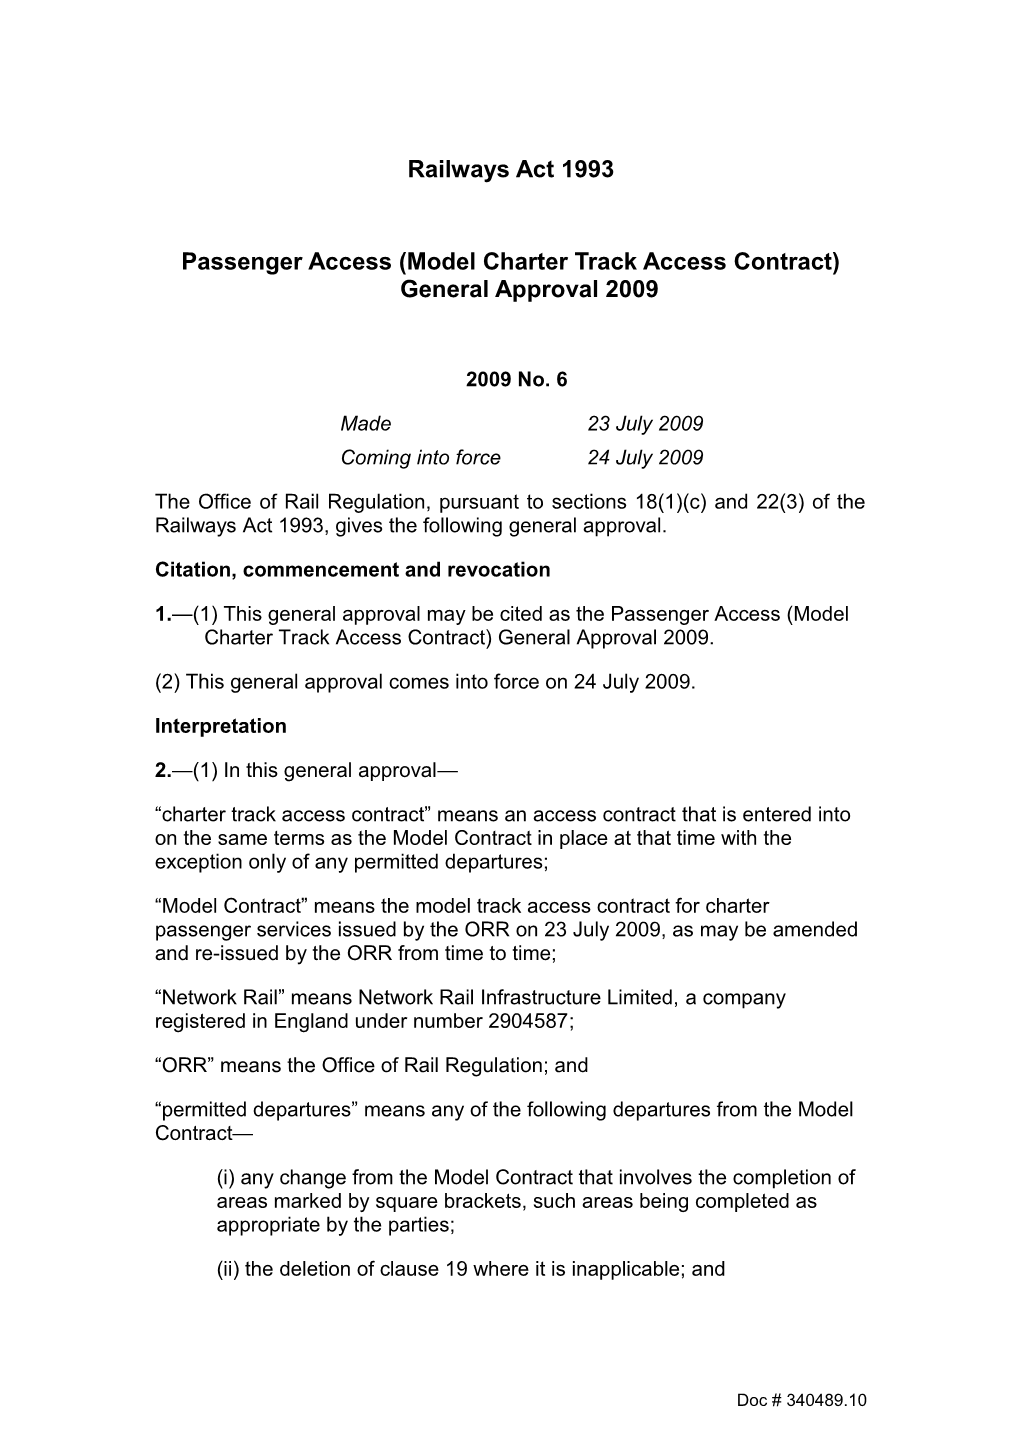 Passenger Access (Model Charter Track Access Contract) General Approval 2009